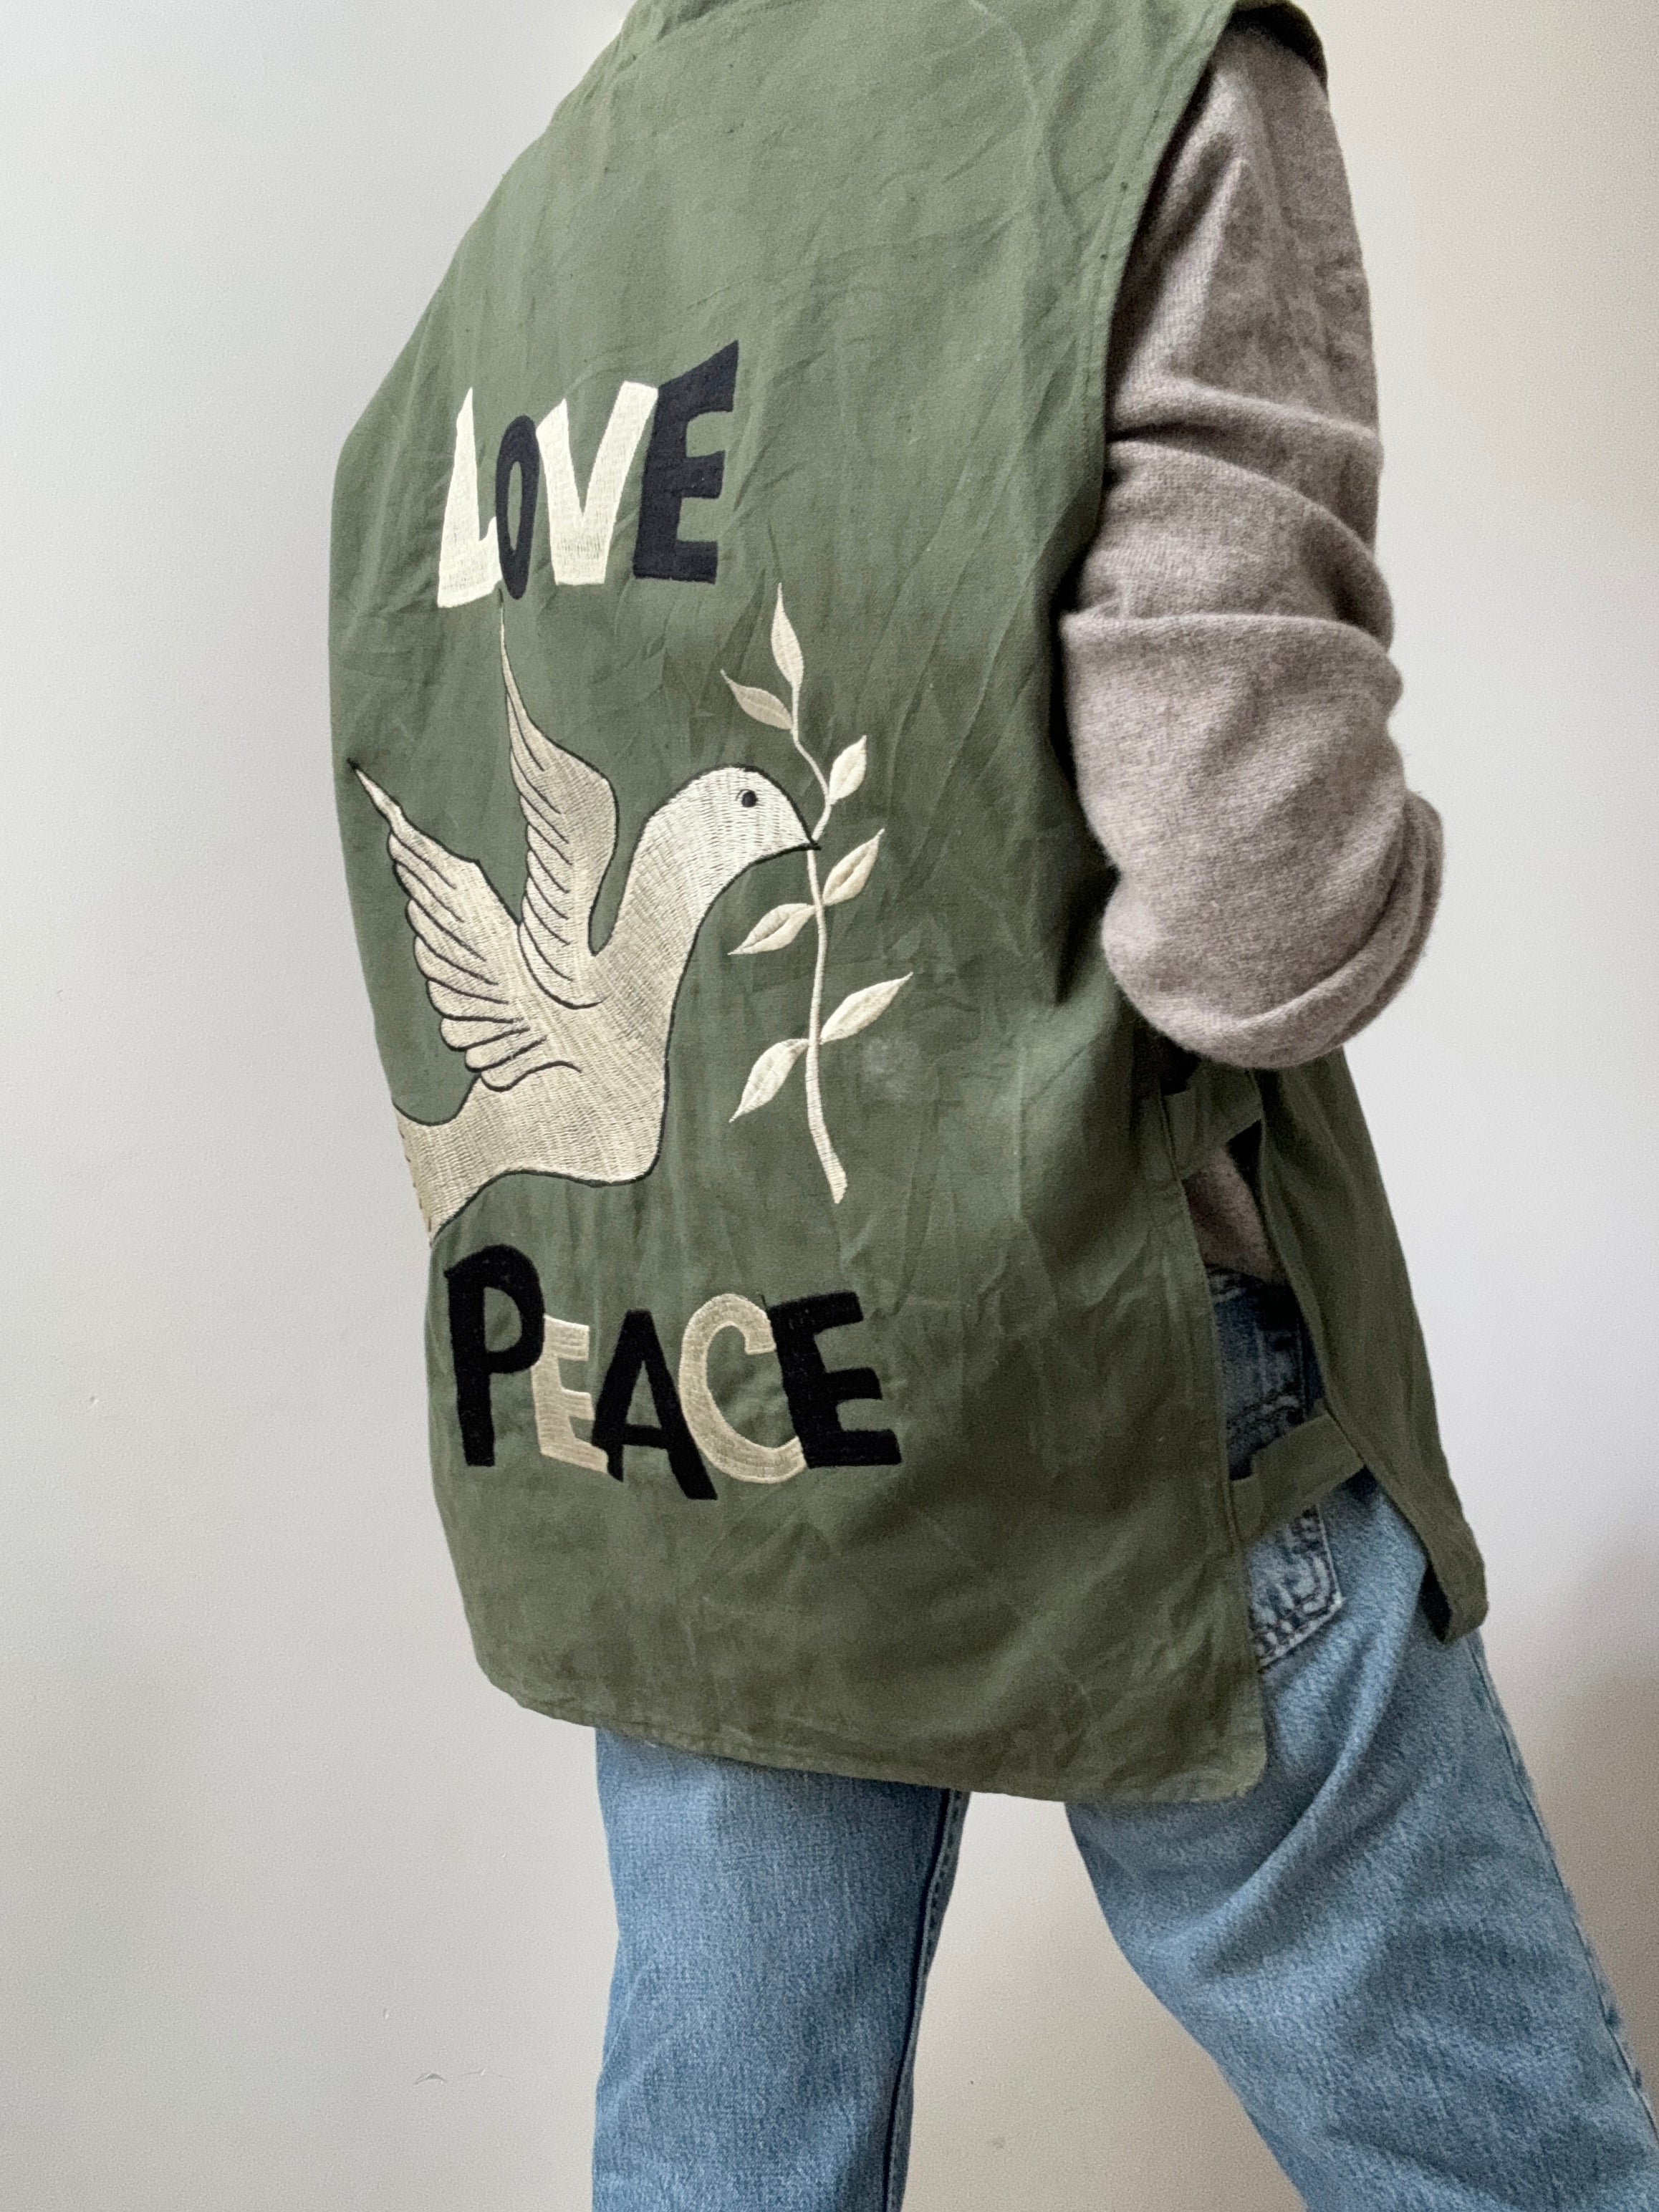 Future Nomads Vests Large Love Peace Army Vest AW240